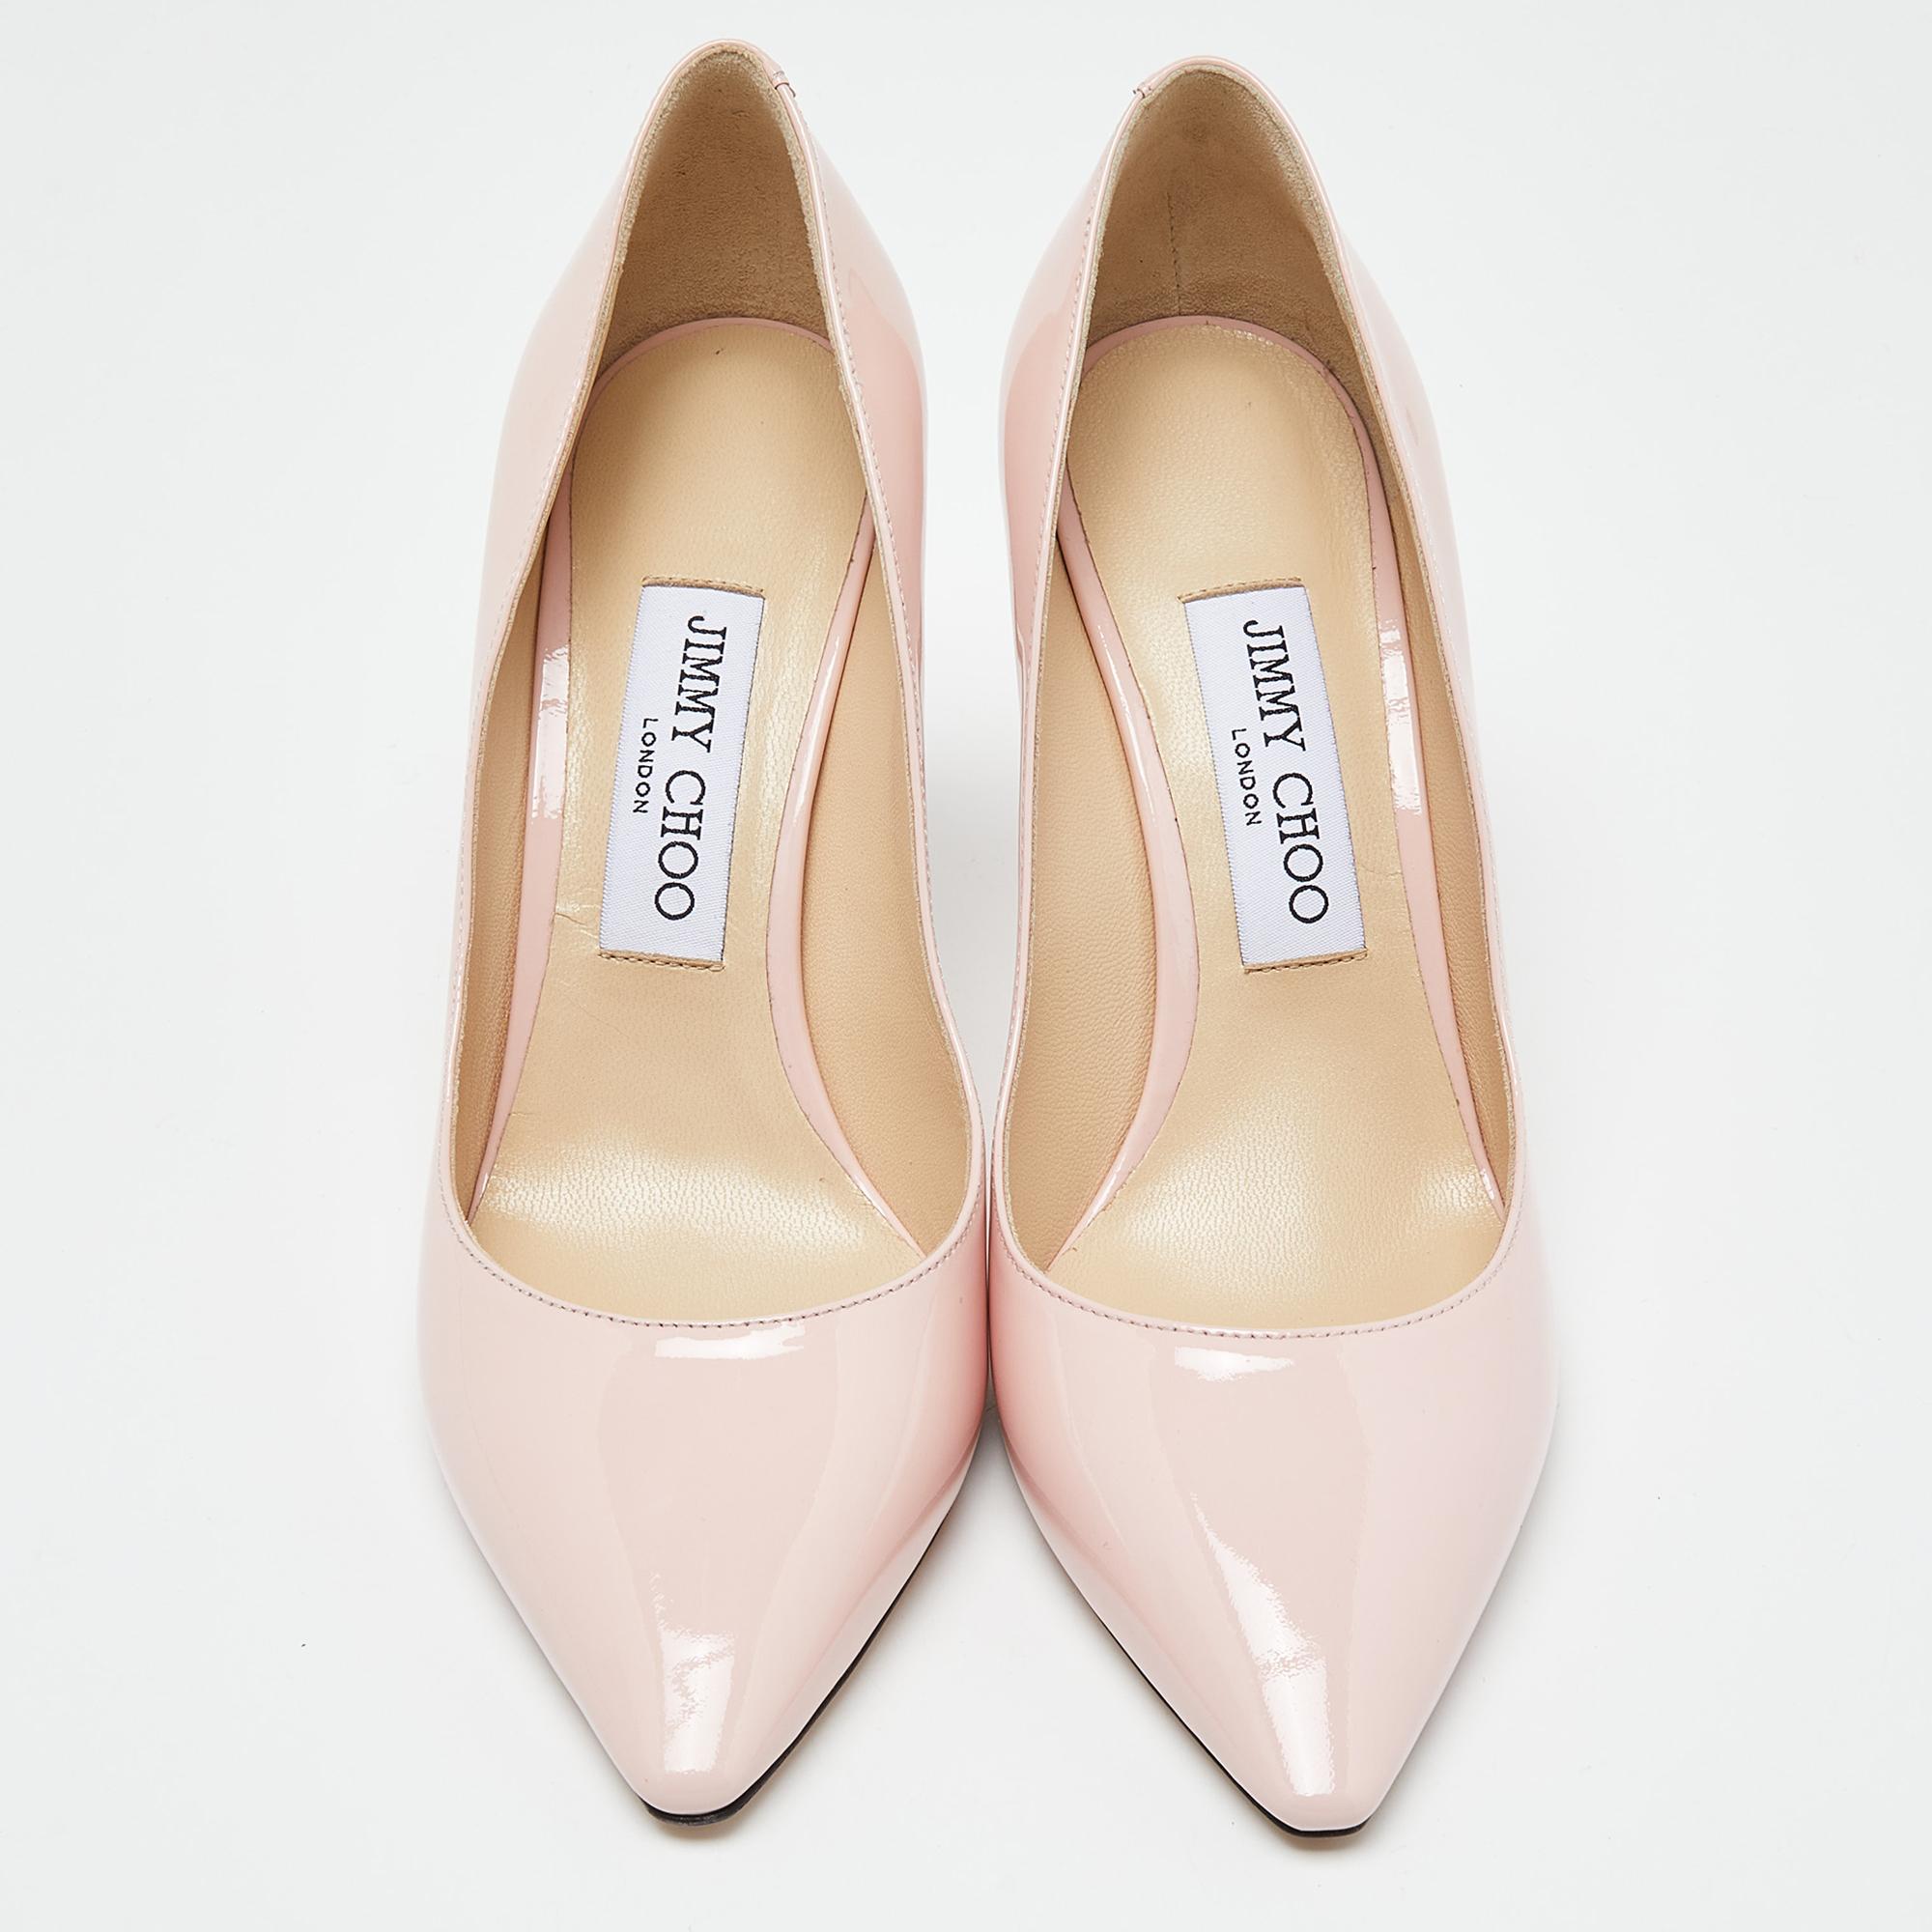 Jimmy Choo Pink Patent Leather Romy Pumps Size 37.5 In New Condition For Sale In Dubai, Al Qouz 2